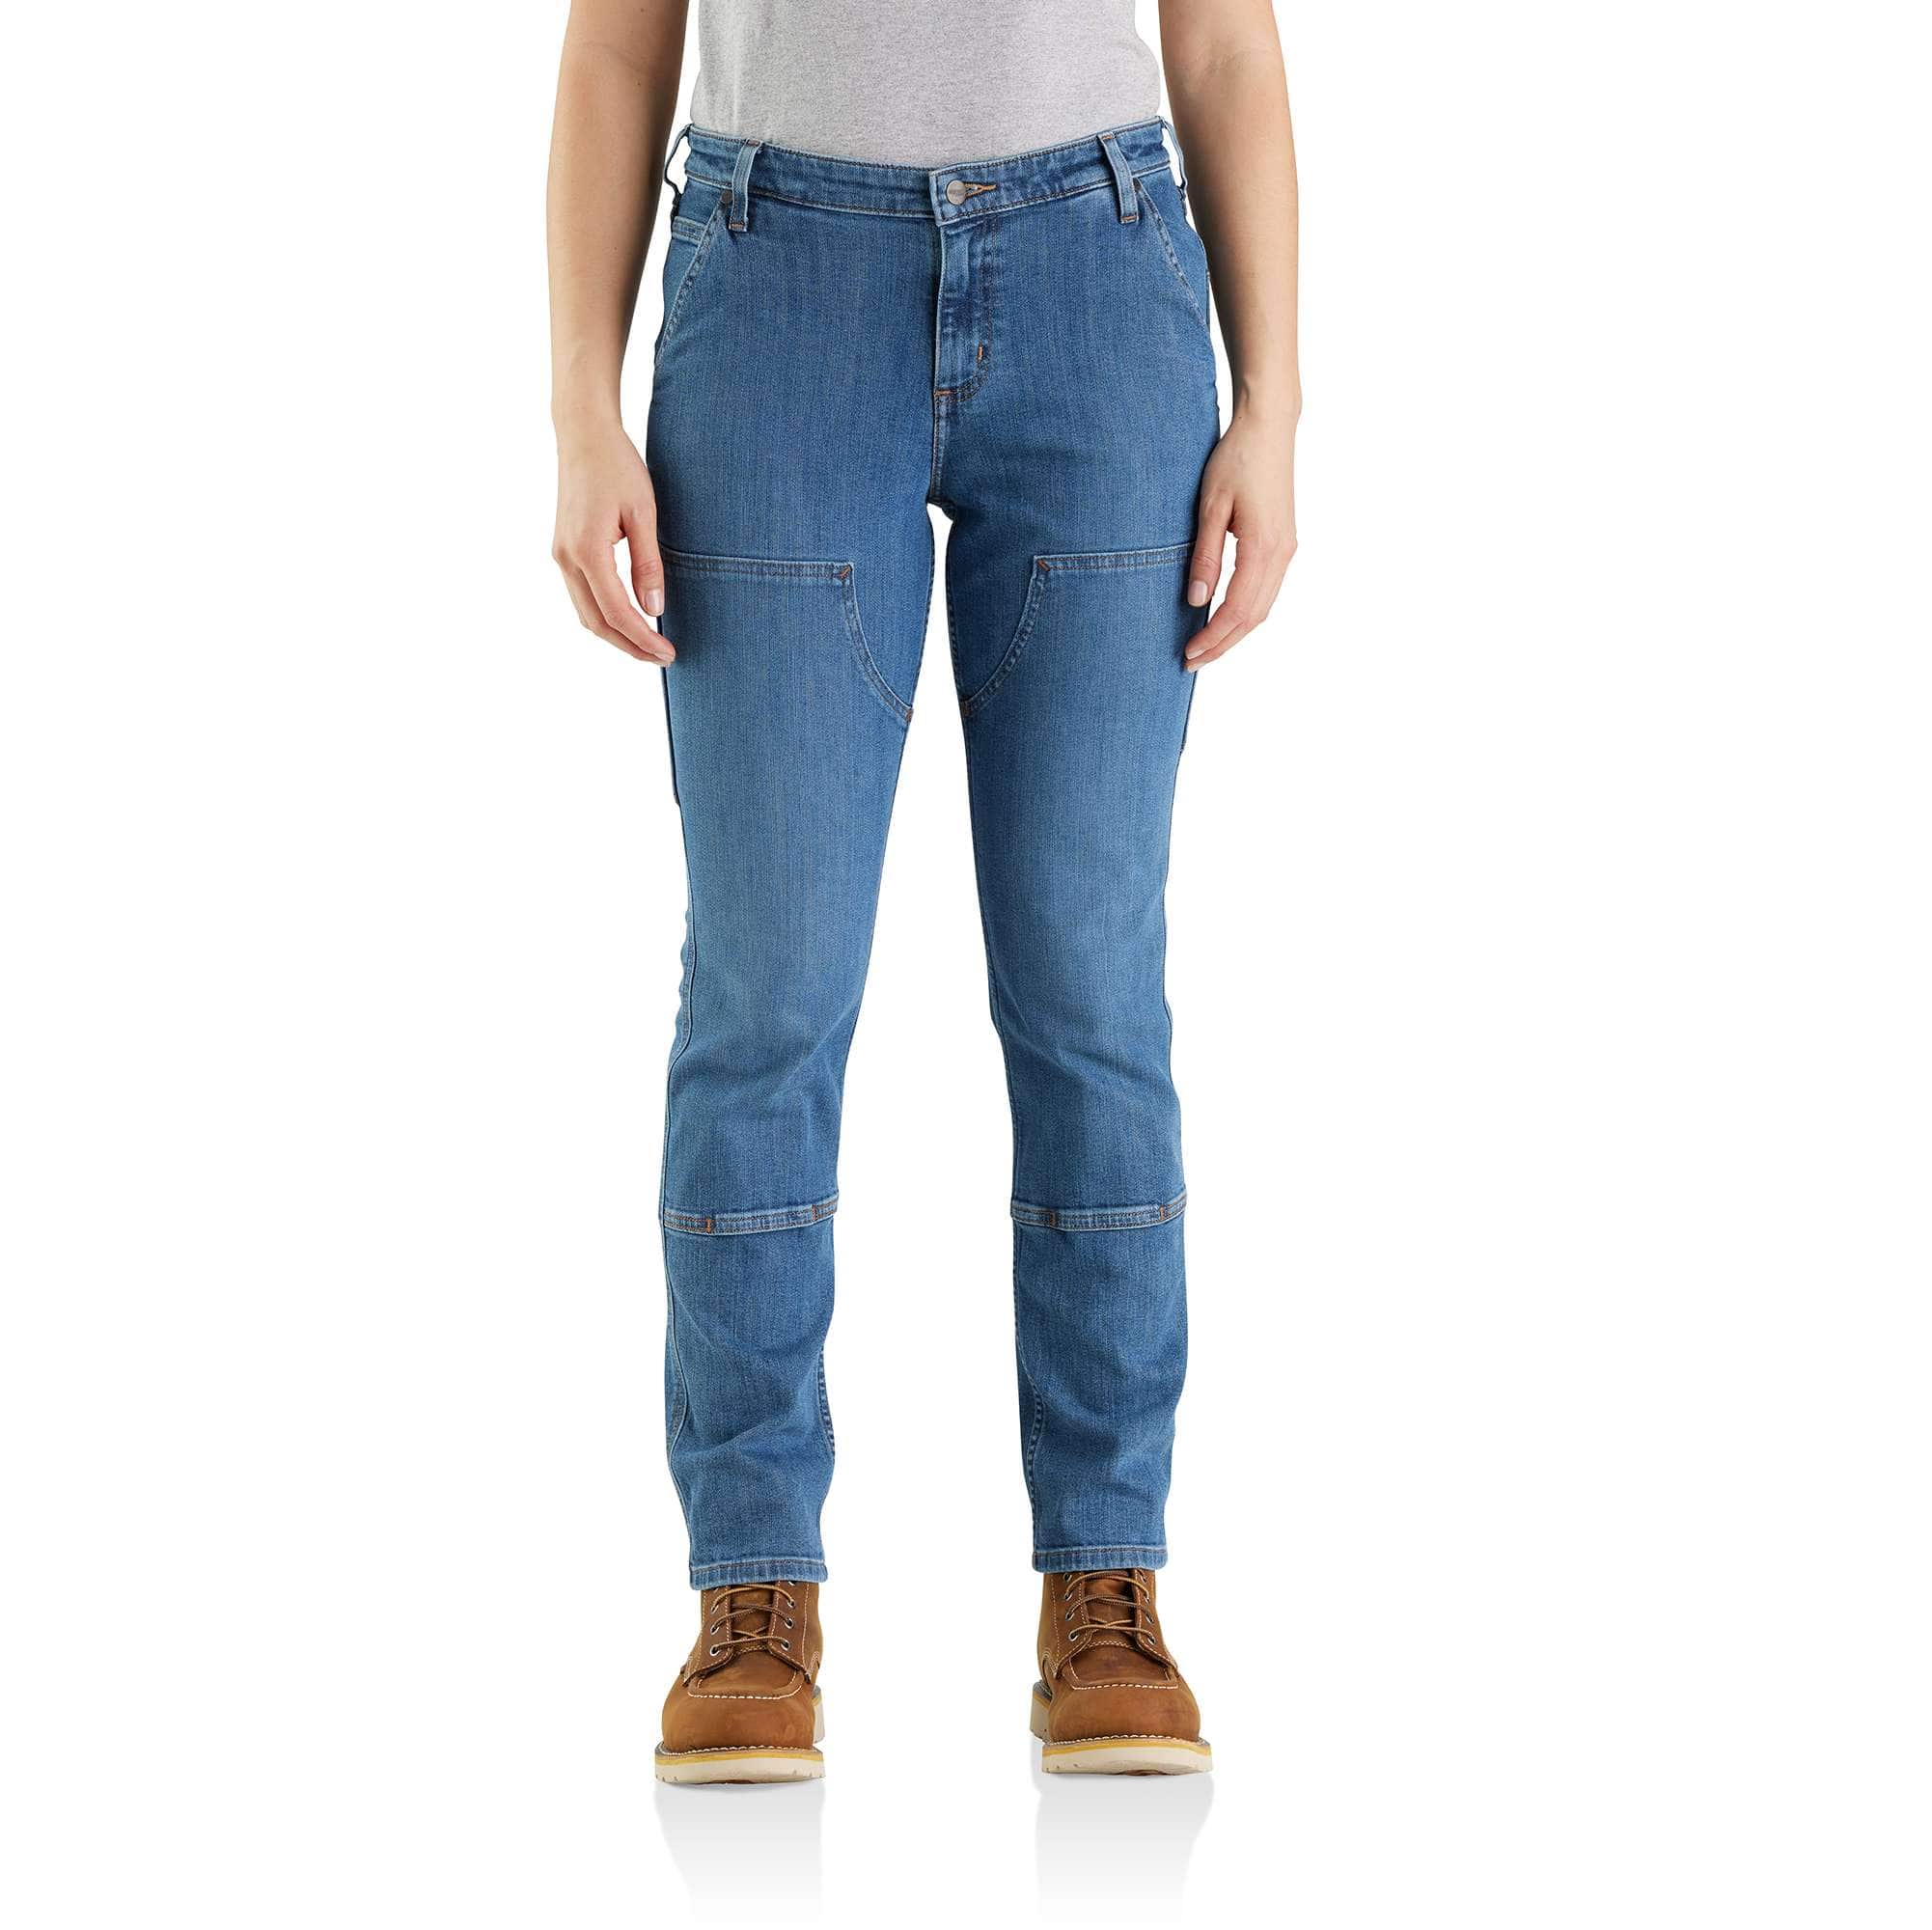 Women's Double-Knee Jean - Relaxed Fit - Rugged Flex®, Coming Soon